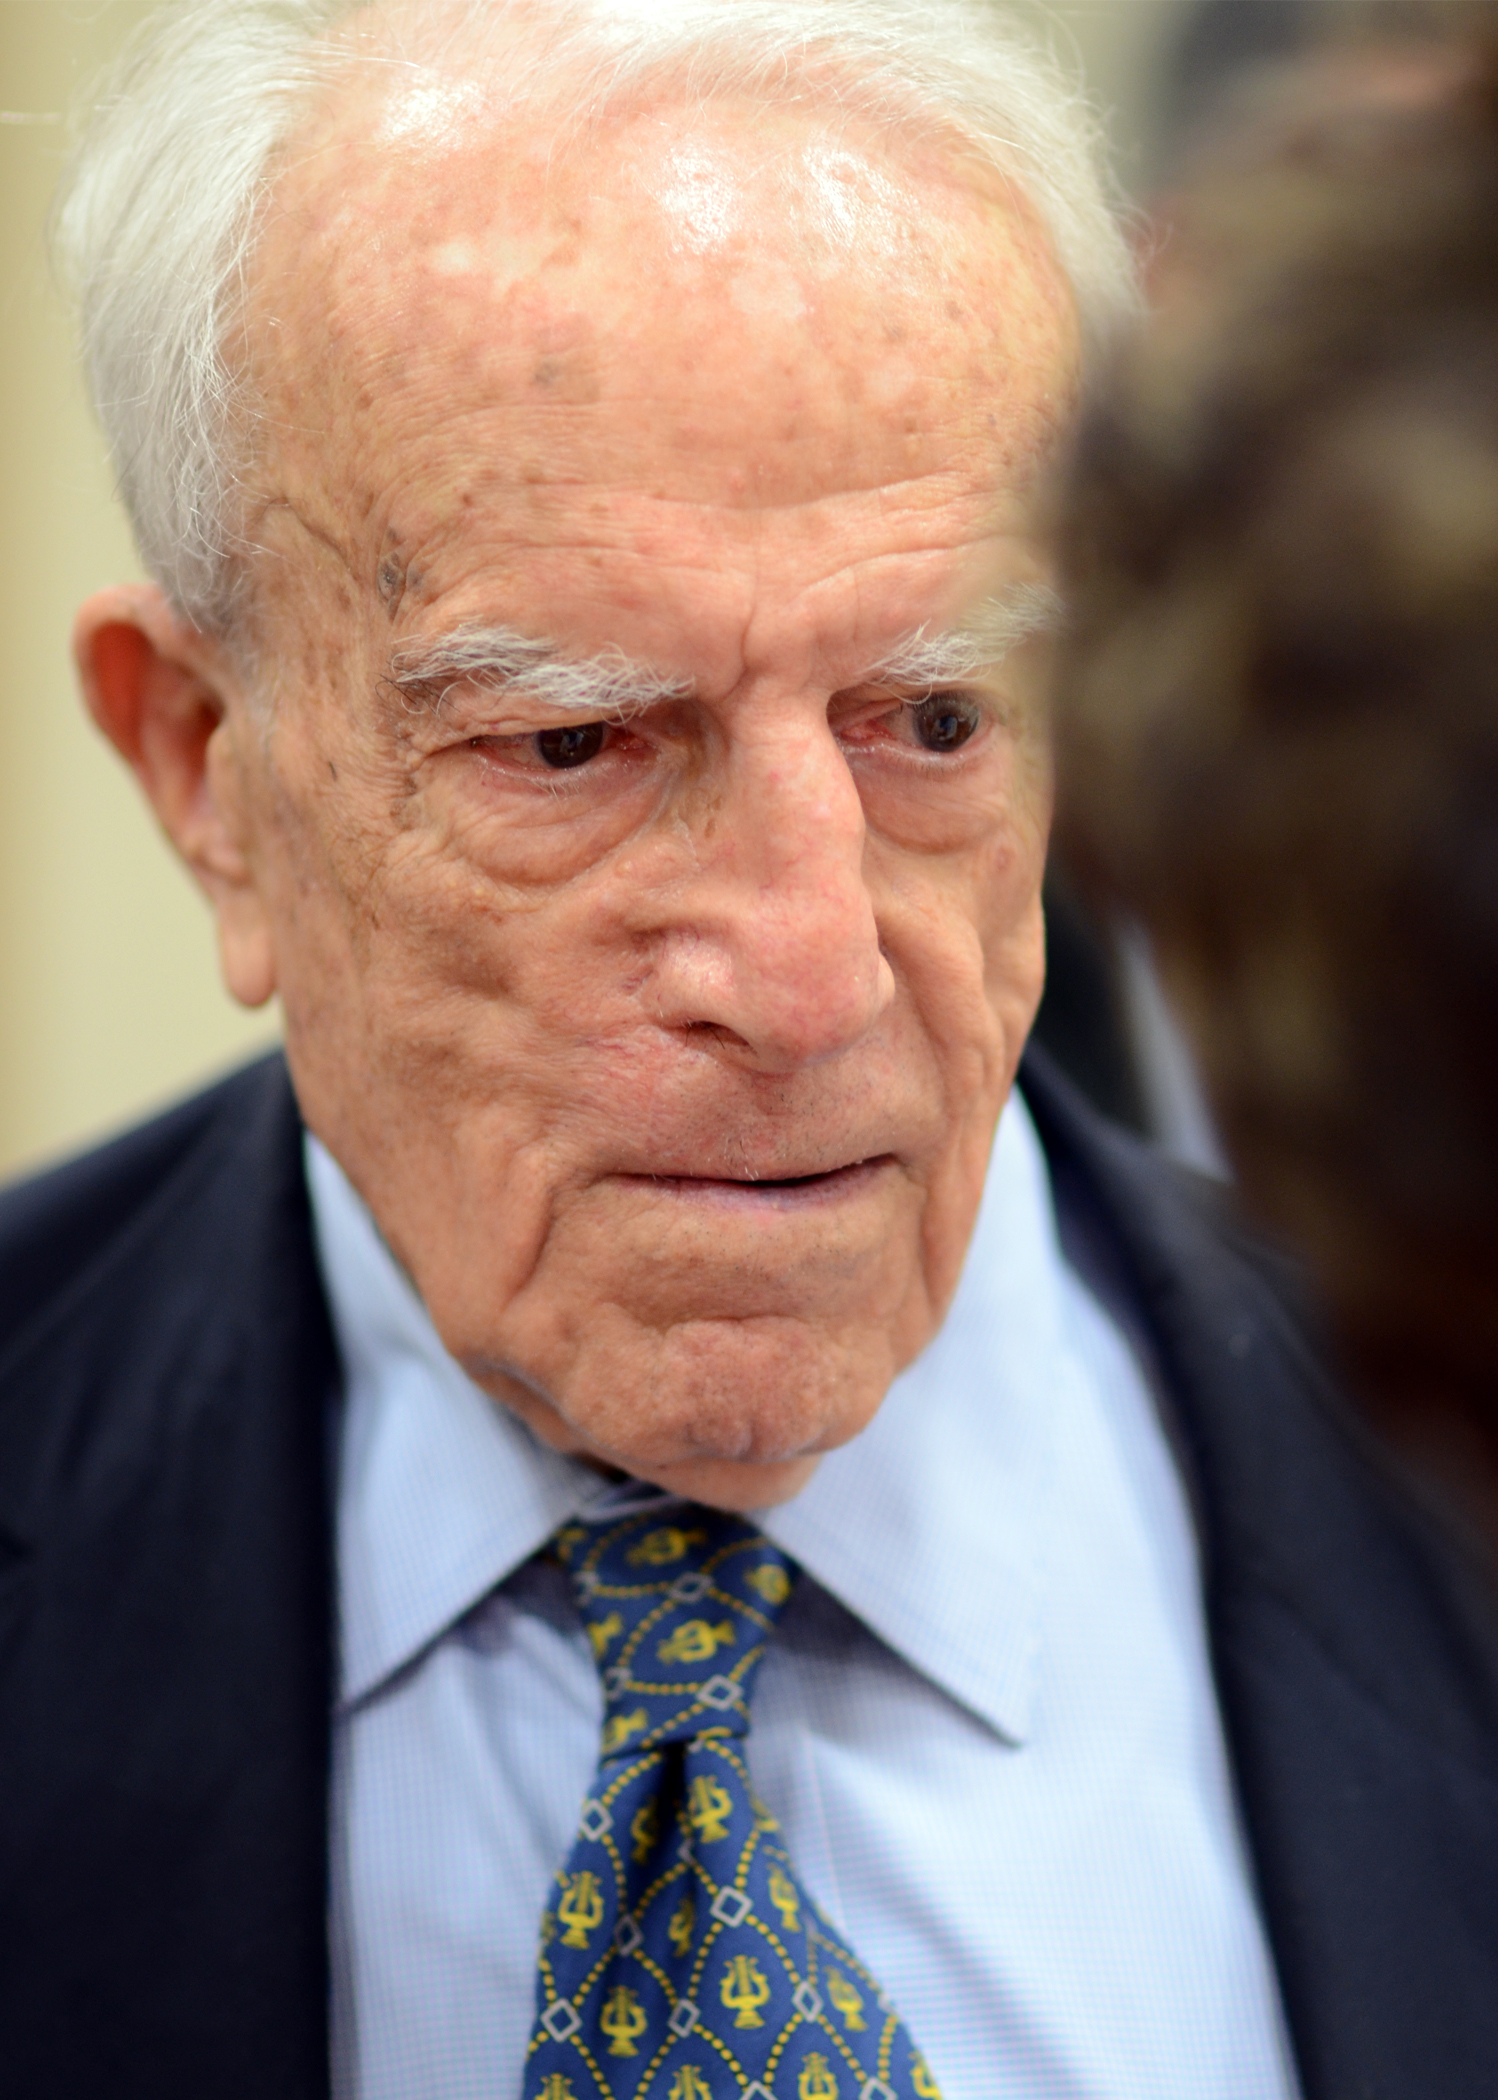 an old gentleman wearing a blue neck tie and a suit